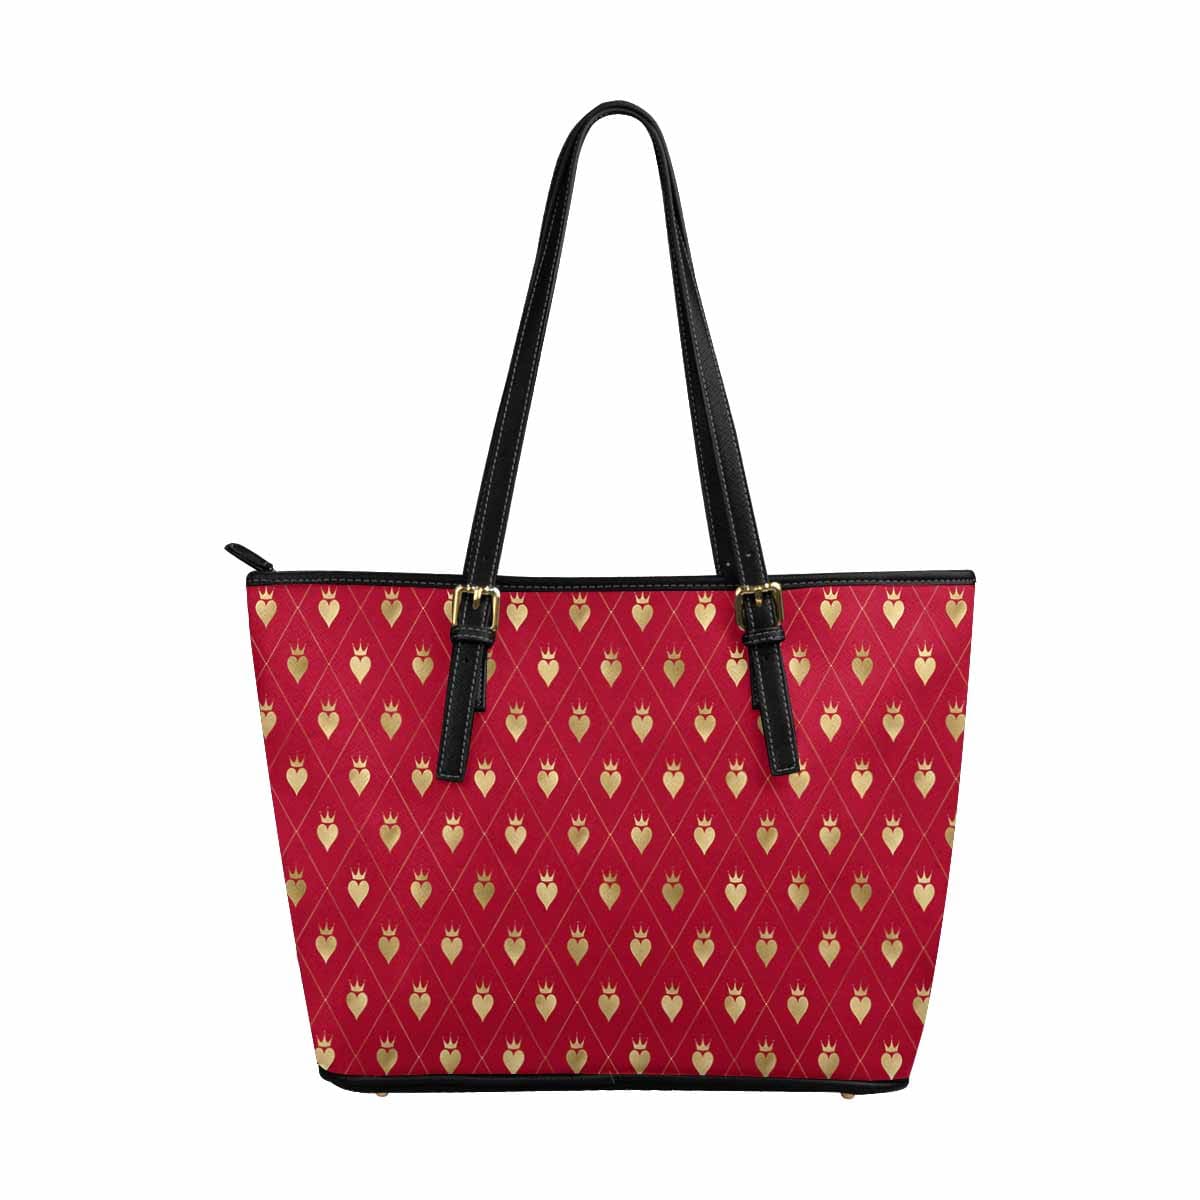 Large Leather Tote Shoulder Bag - Red - Bags | Leather Tote Bags